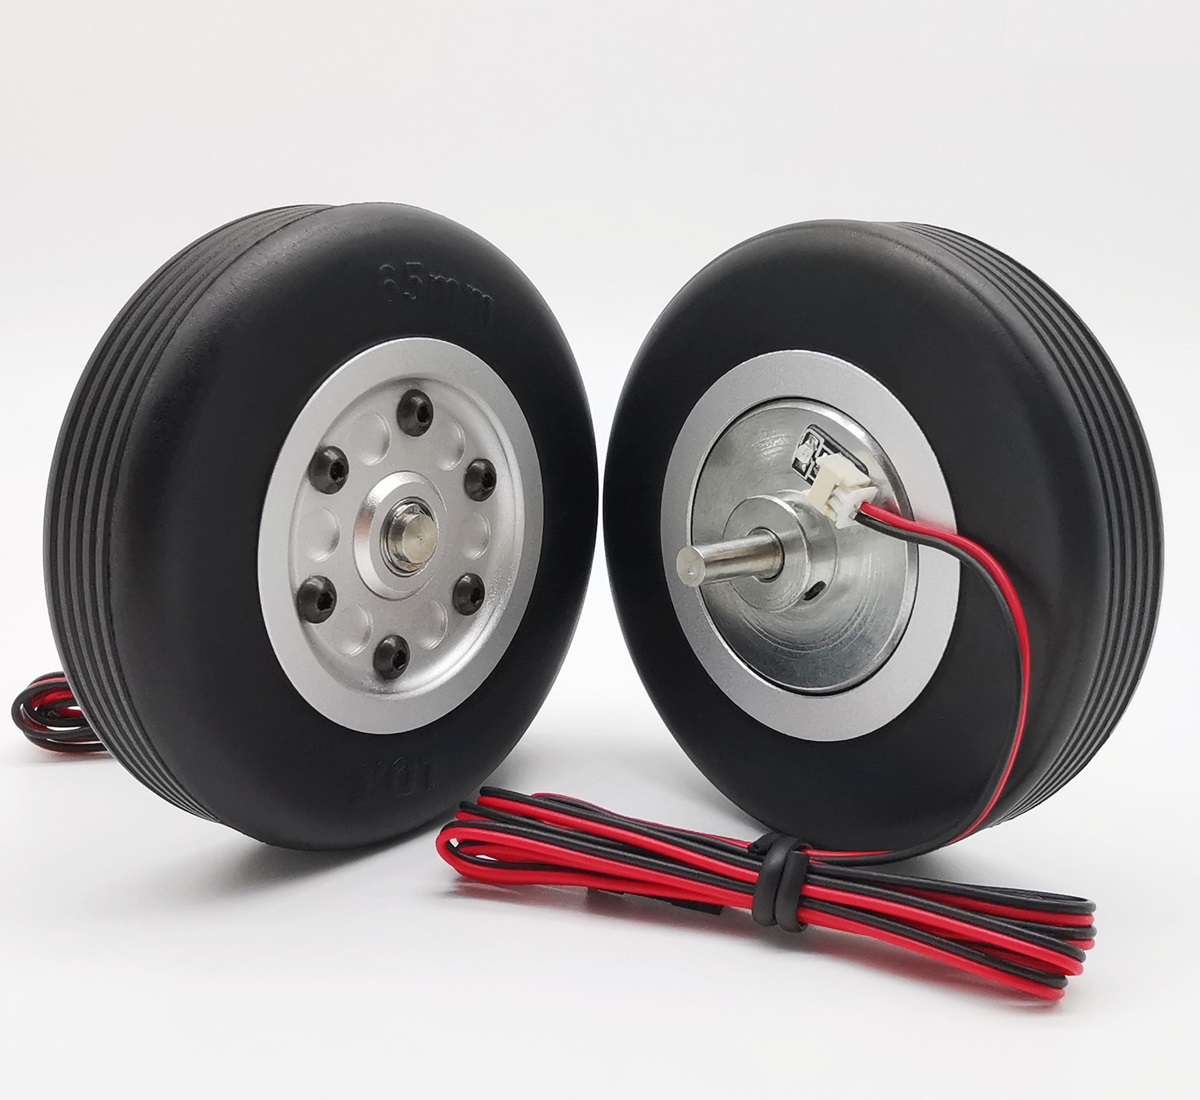  LD Technology Electric Brake System 65mm With 4.0mm Wheel Shaft 